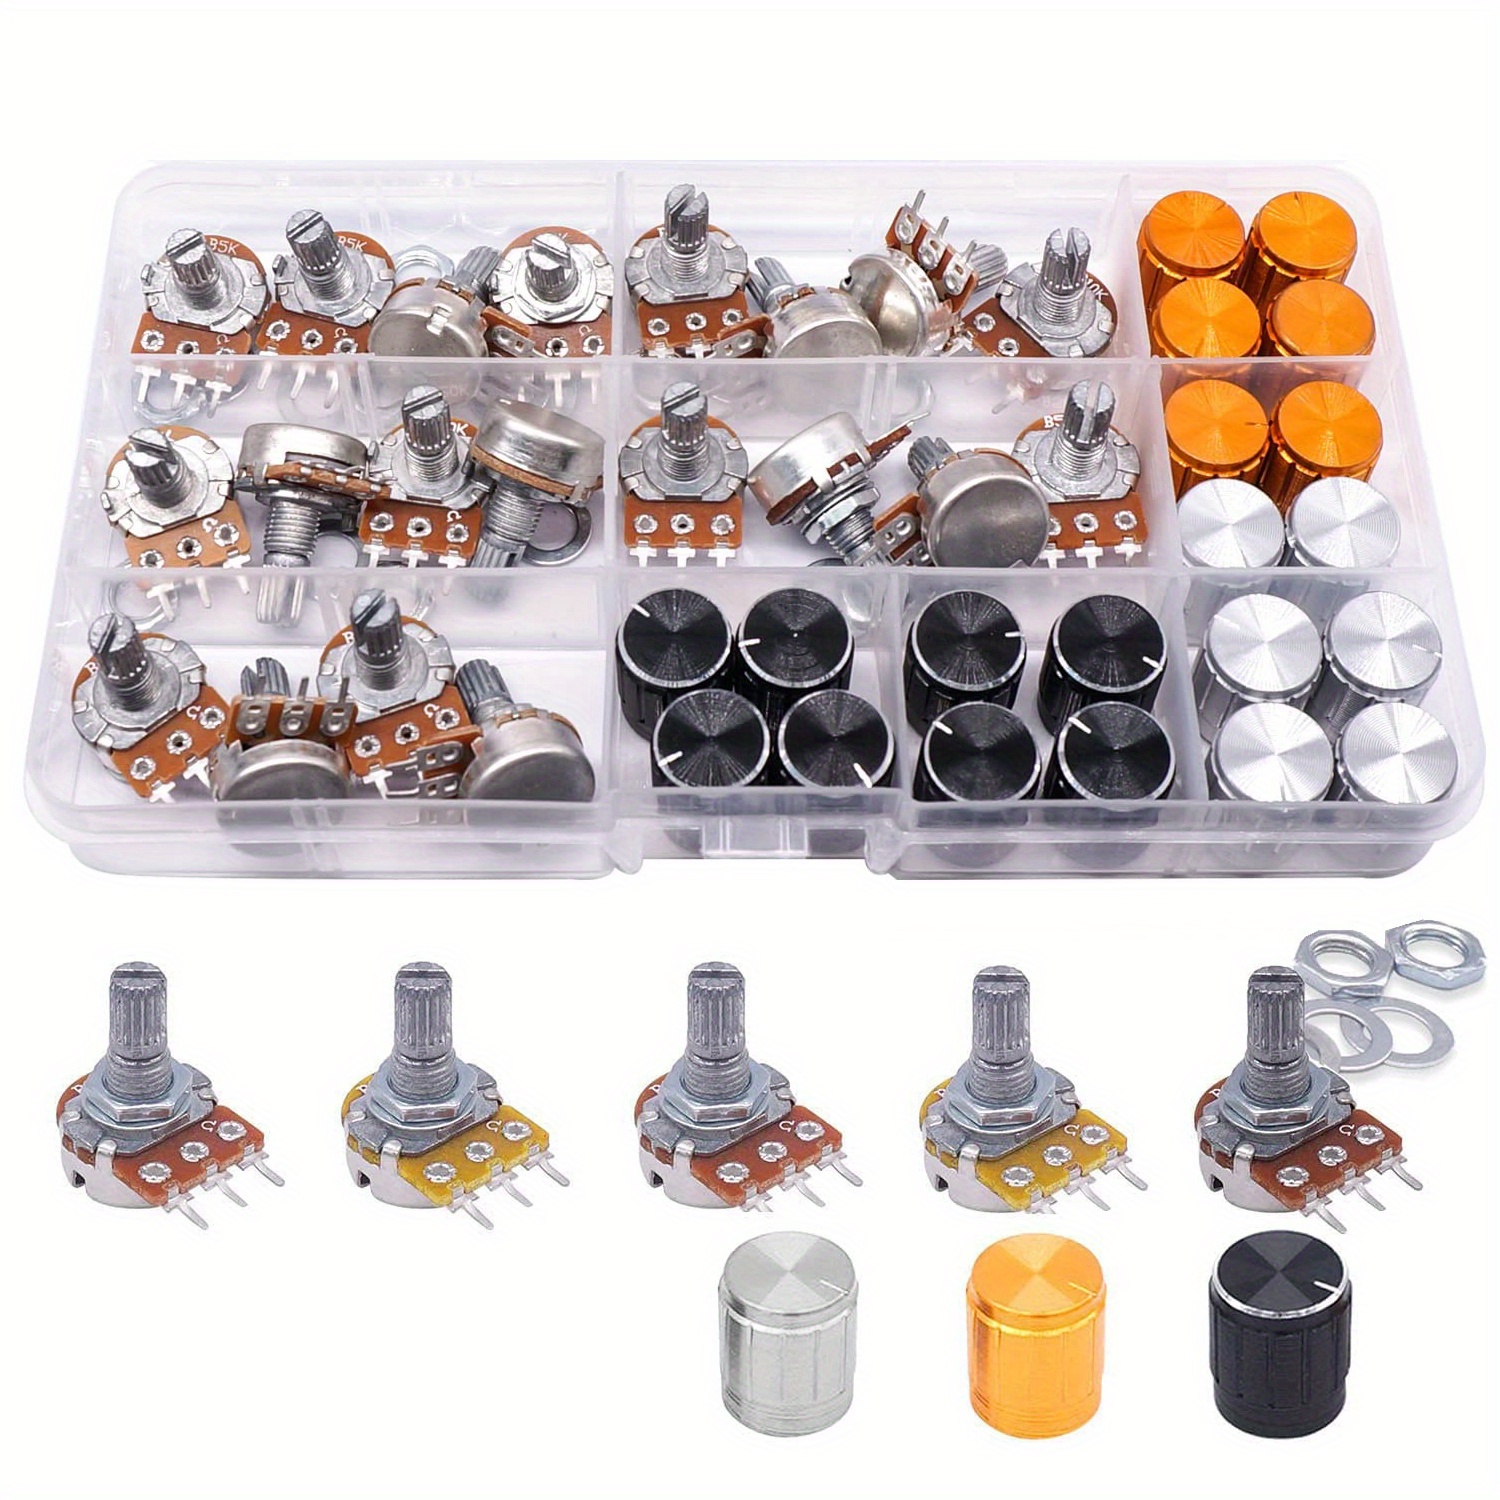 

60-piece Potentiometer Kit With Aluminum Alloy Knobs - B5k To B100k Ohm, Linear Taper For Audio & Guitar Controls, Includes Nuts, Washers - Durable Metal Construction